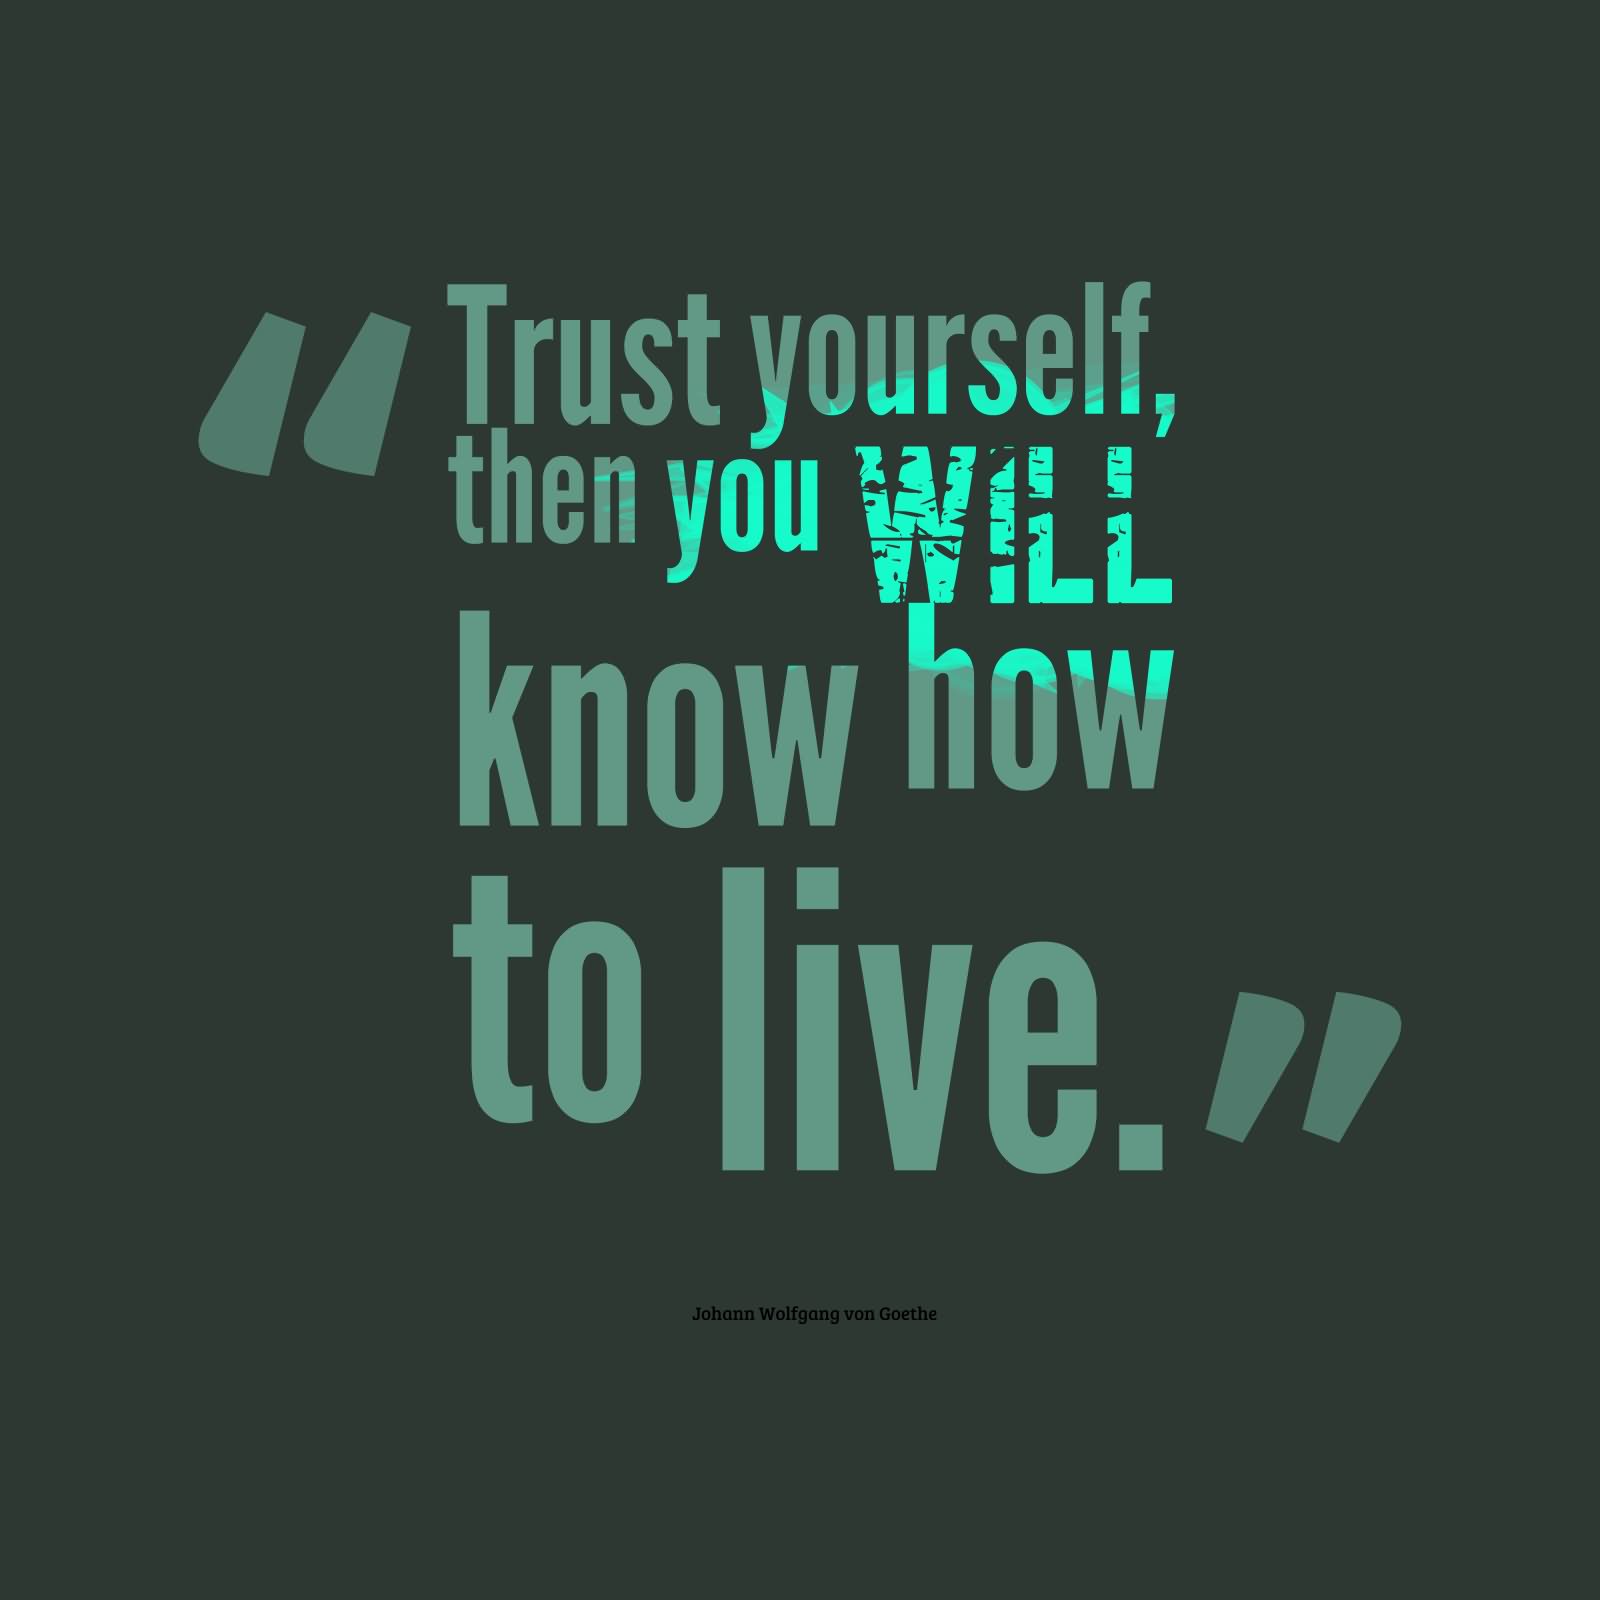 Trust yourself then you will know how to live.